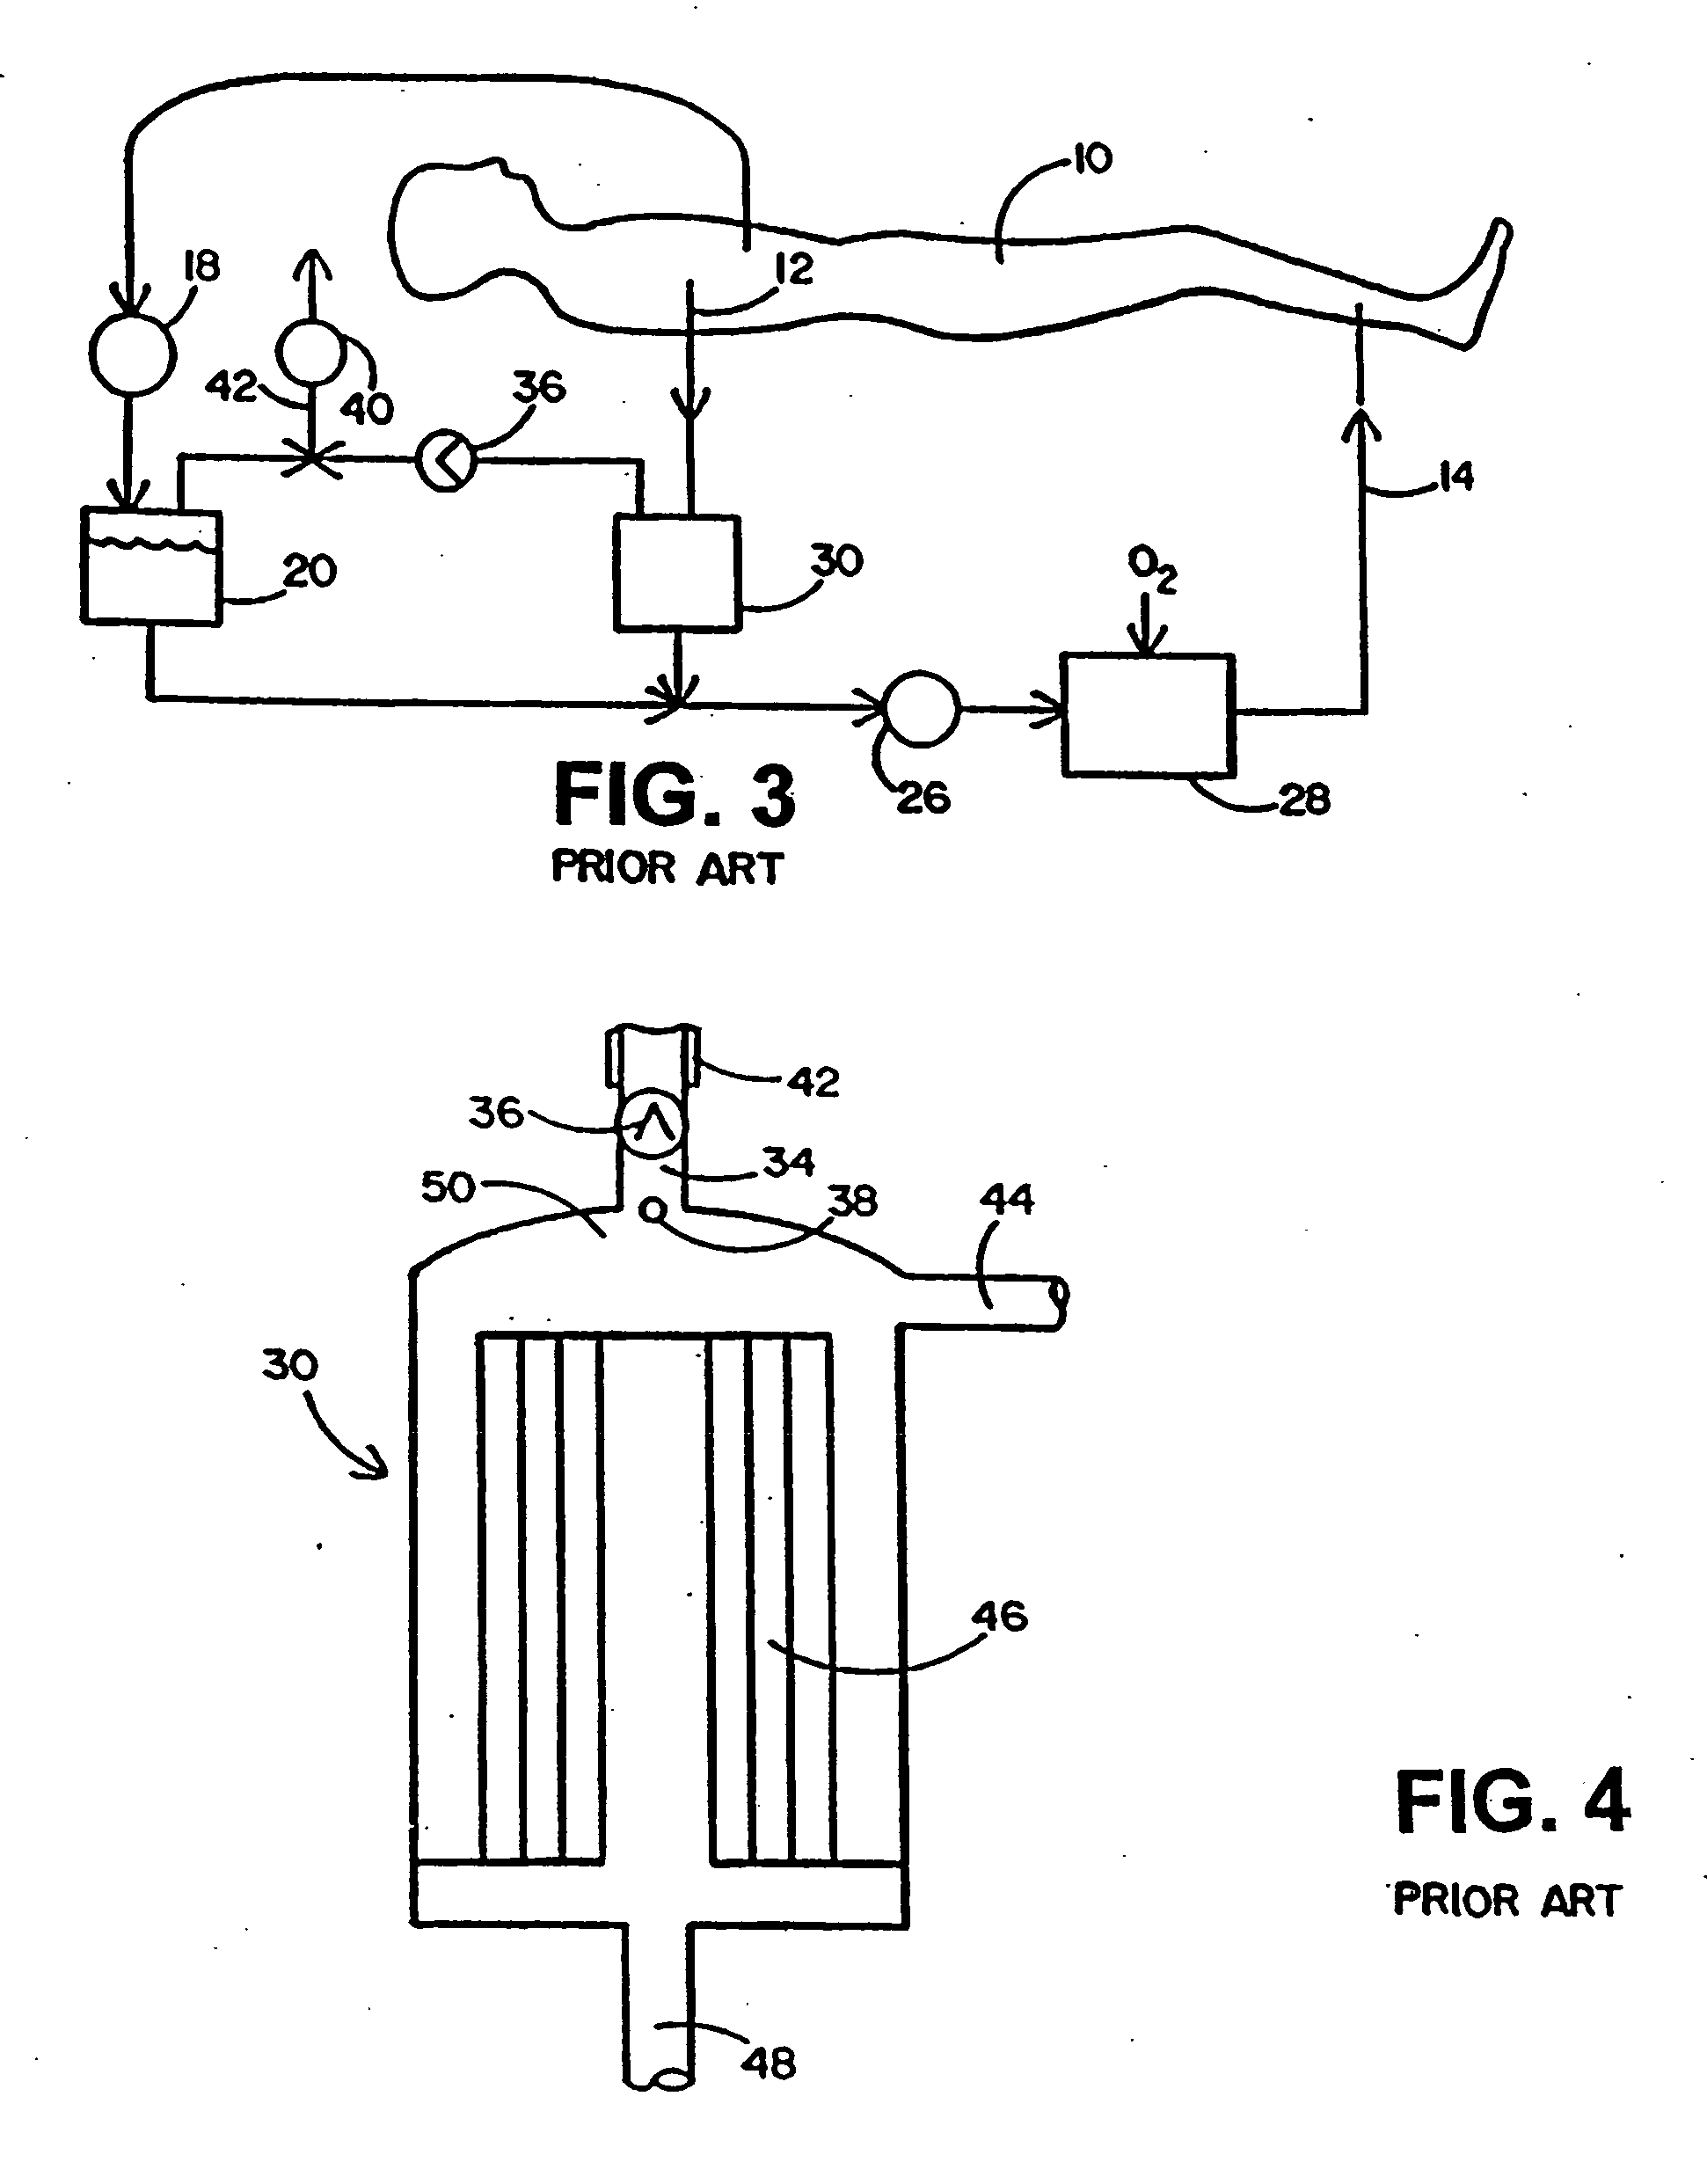 Cardiopulmonary bypass extracorporeal blood circuit apparatus and method